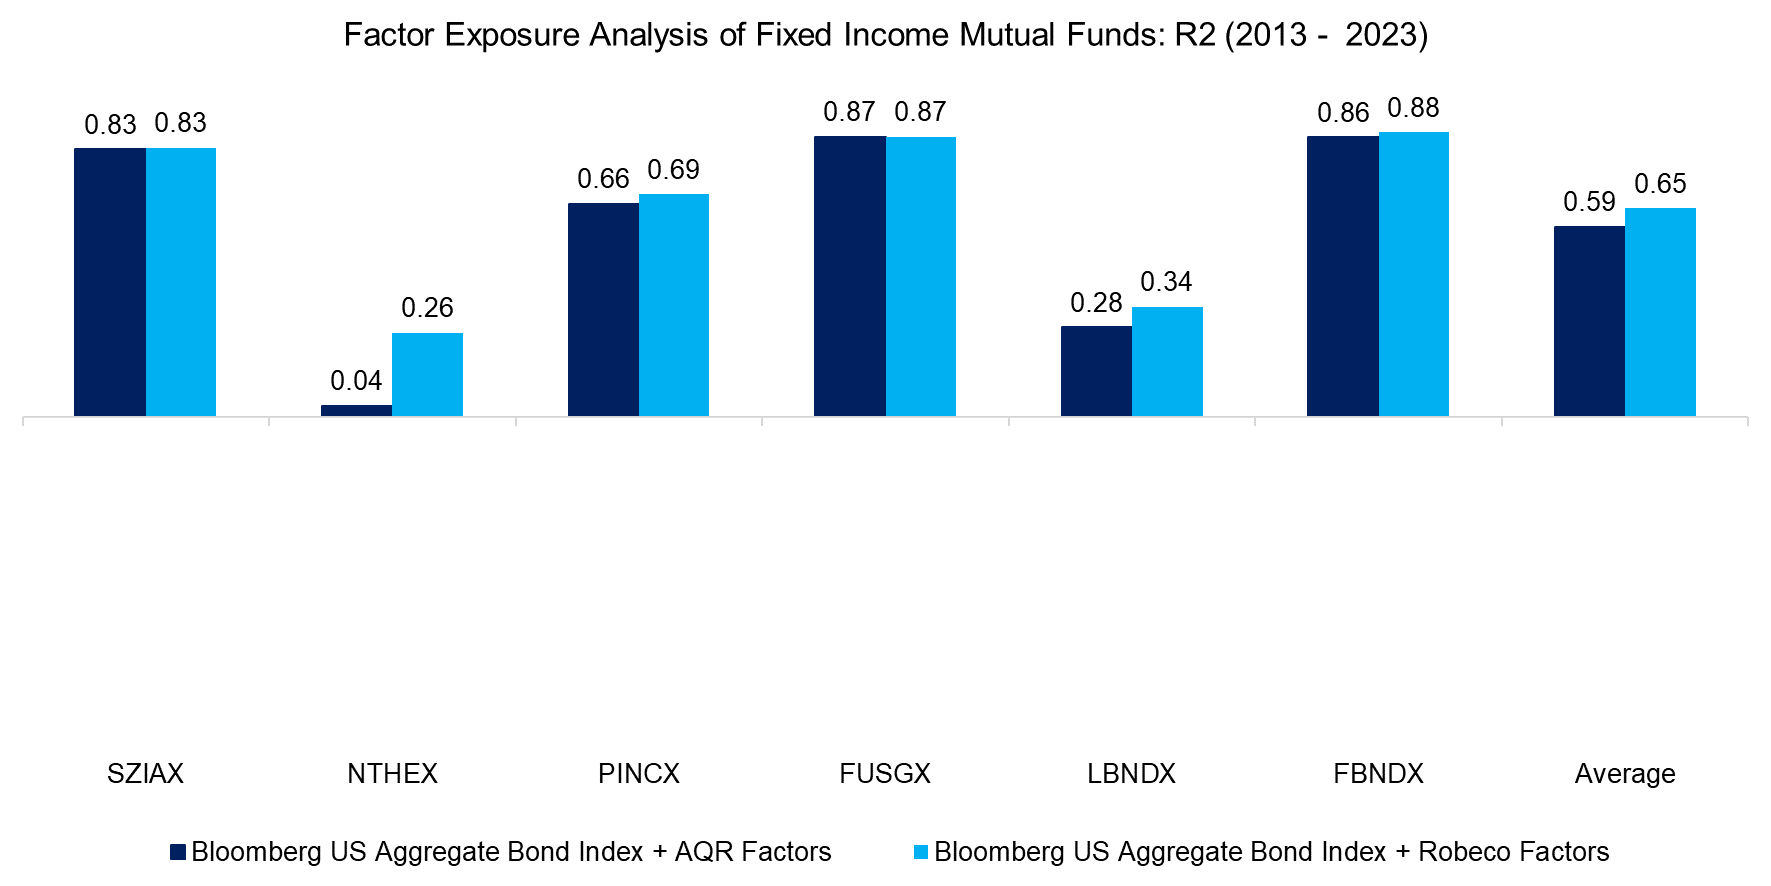 Factor Exposure Analysis of Fixed Income Mutal Funds R2 (2013 - 2023)